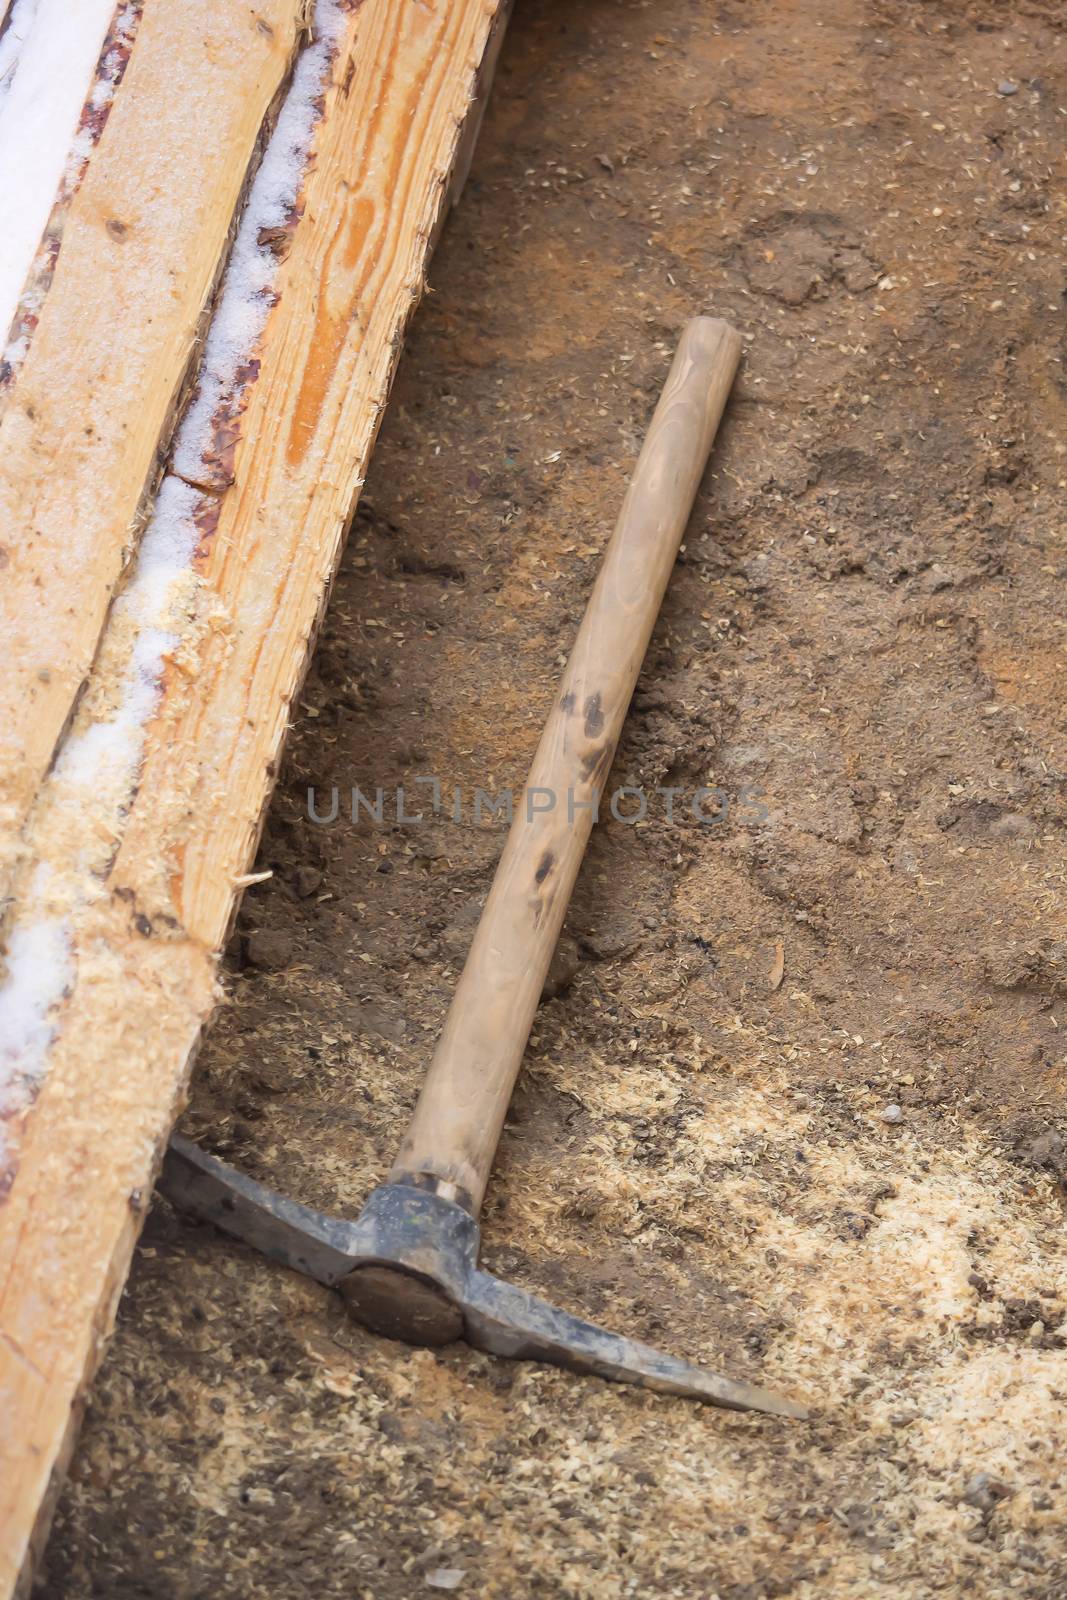 Tool is lying on a construction site